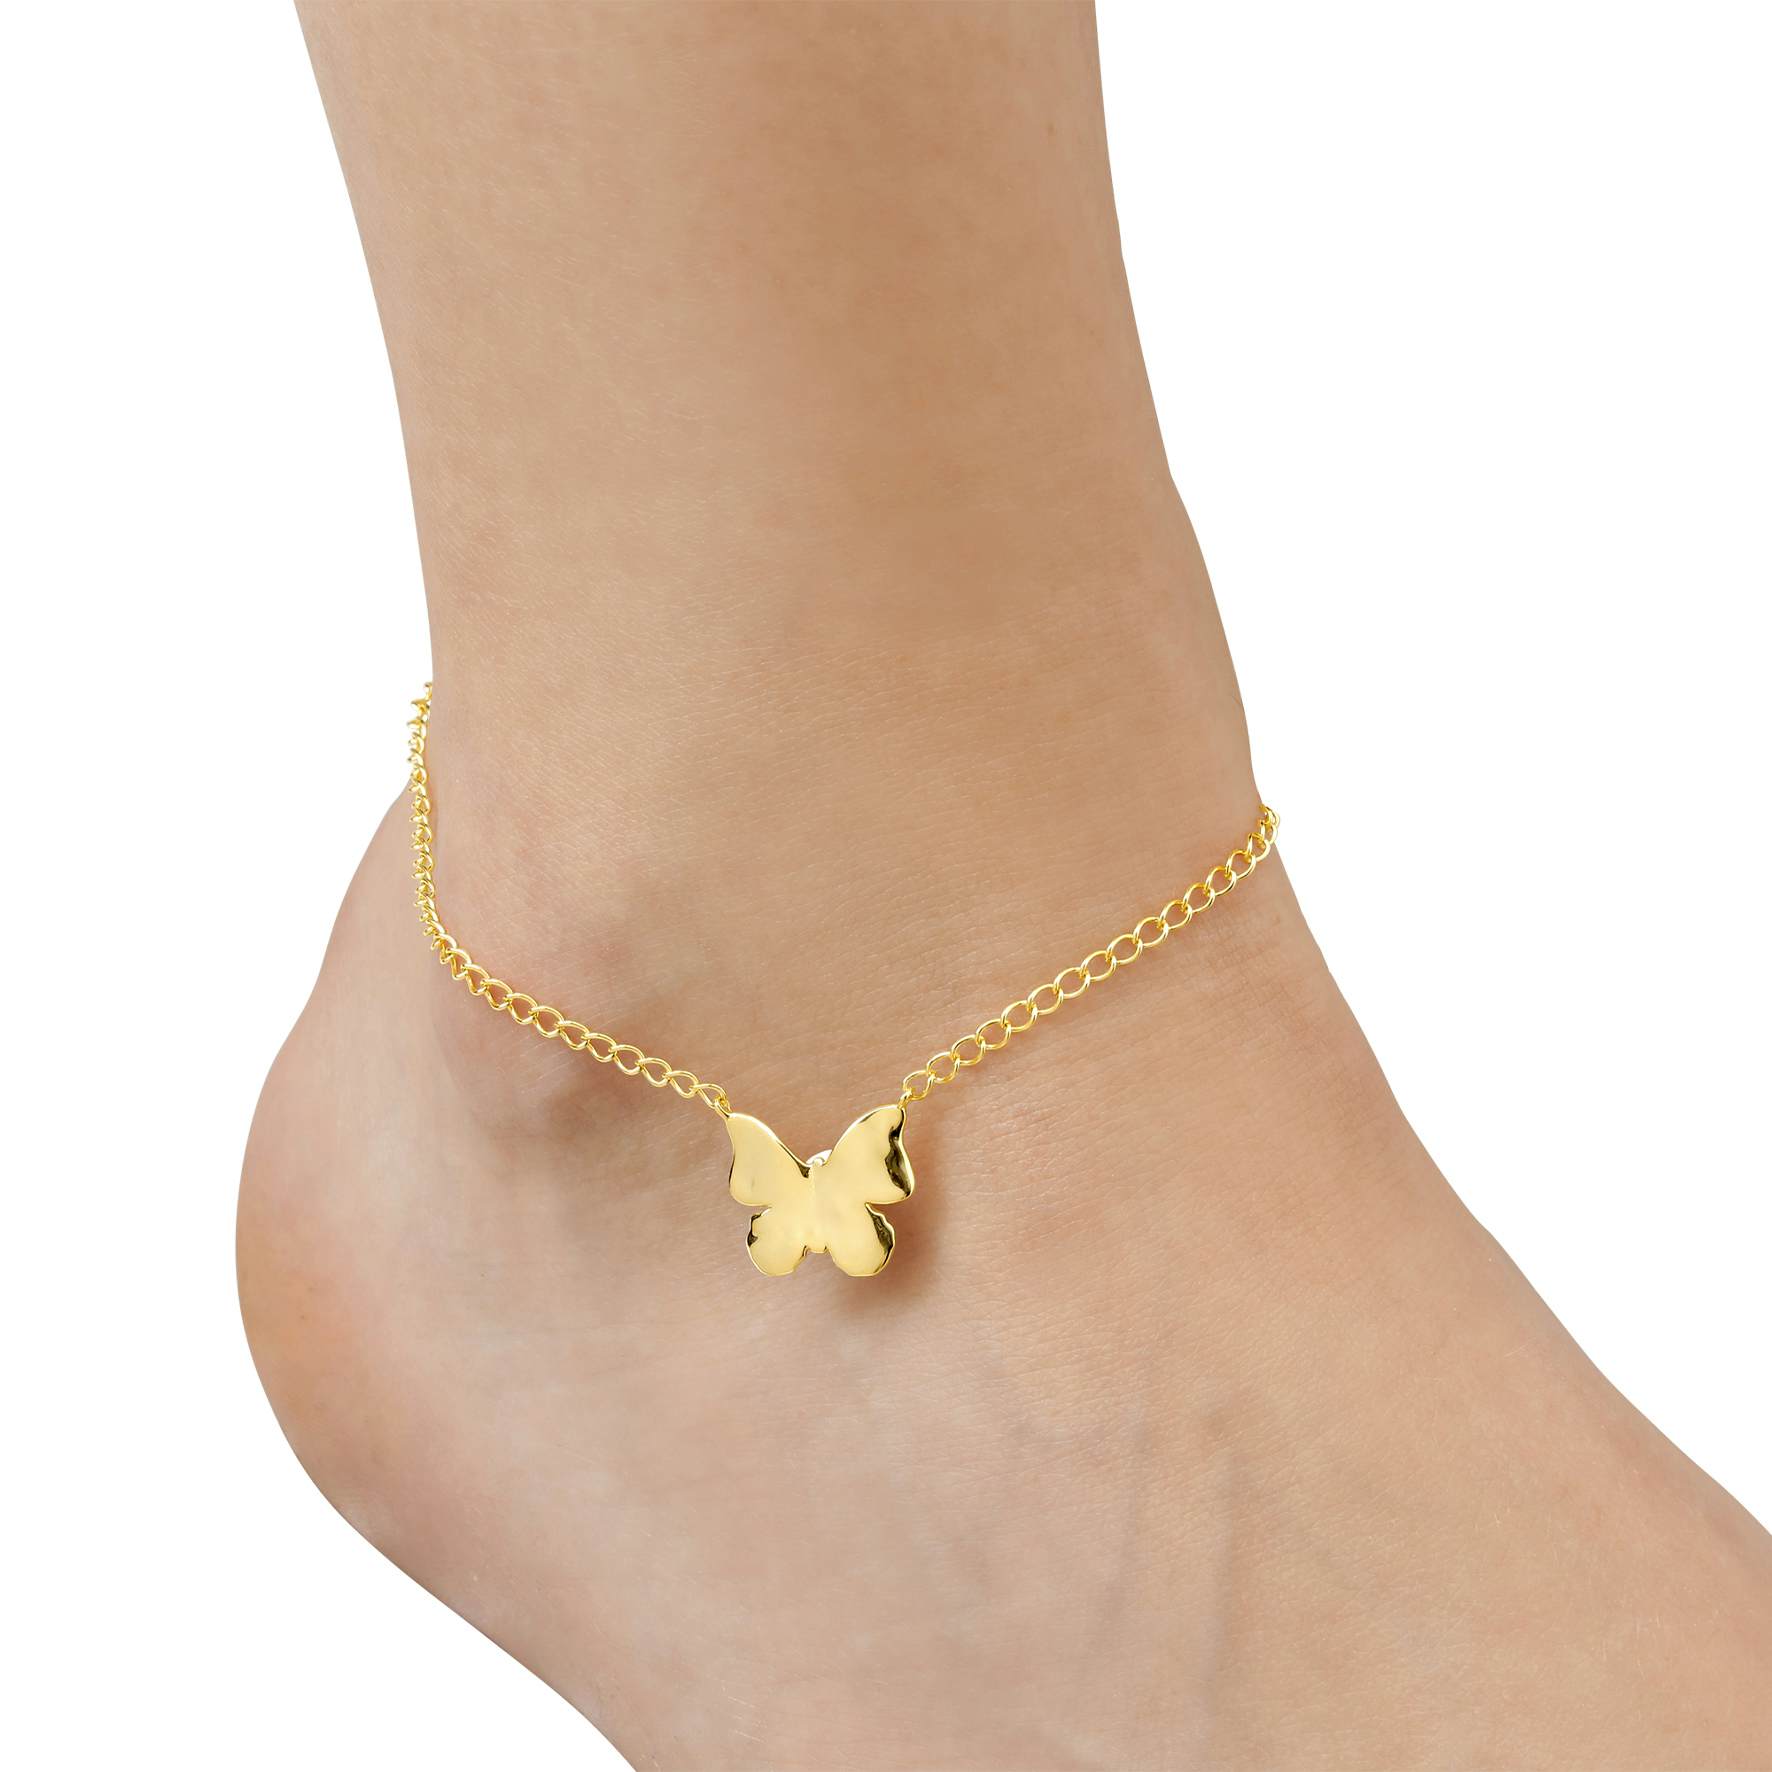 Butterfly Anklet Chain from Jane Kønig in Silver Sterling 925